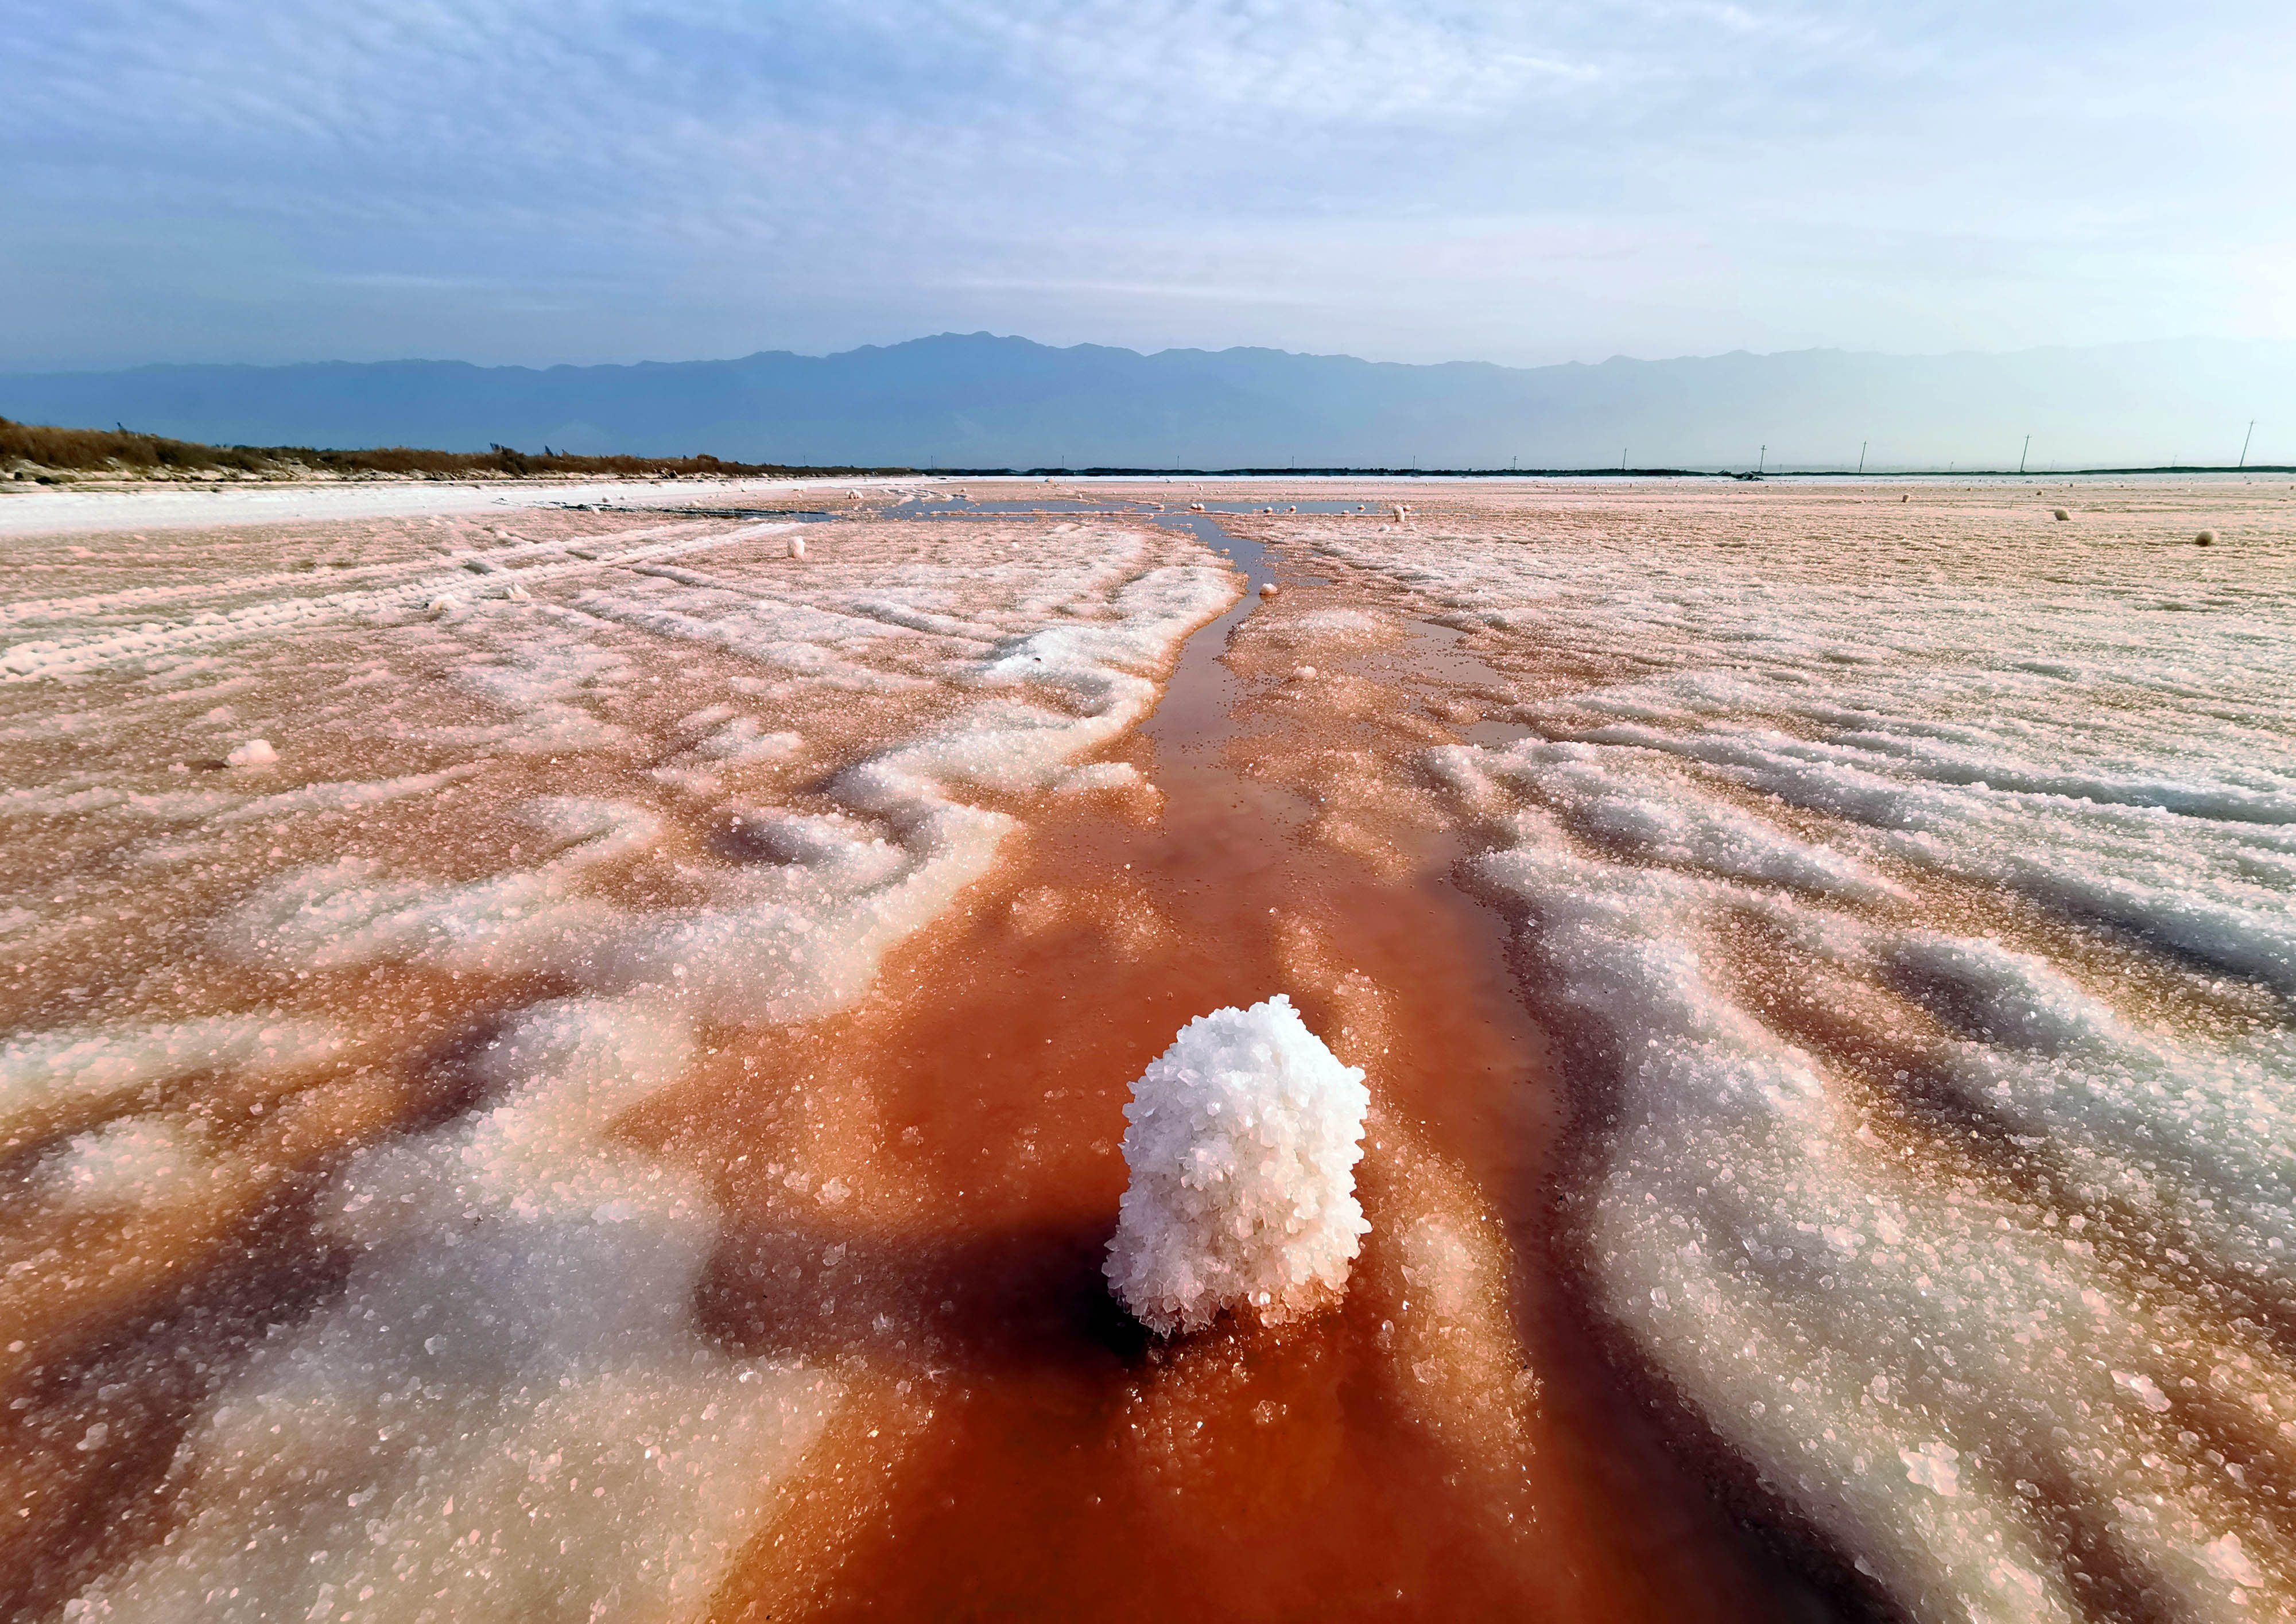 The nitrate flowers blossomed in the salt lake in Yuncheng,Shanxi,China on 29th December, 2019